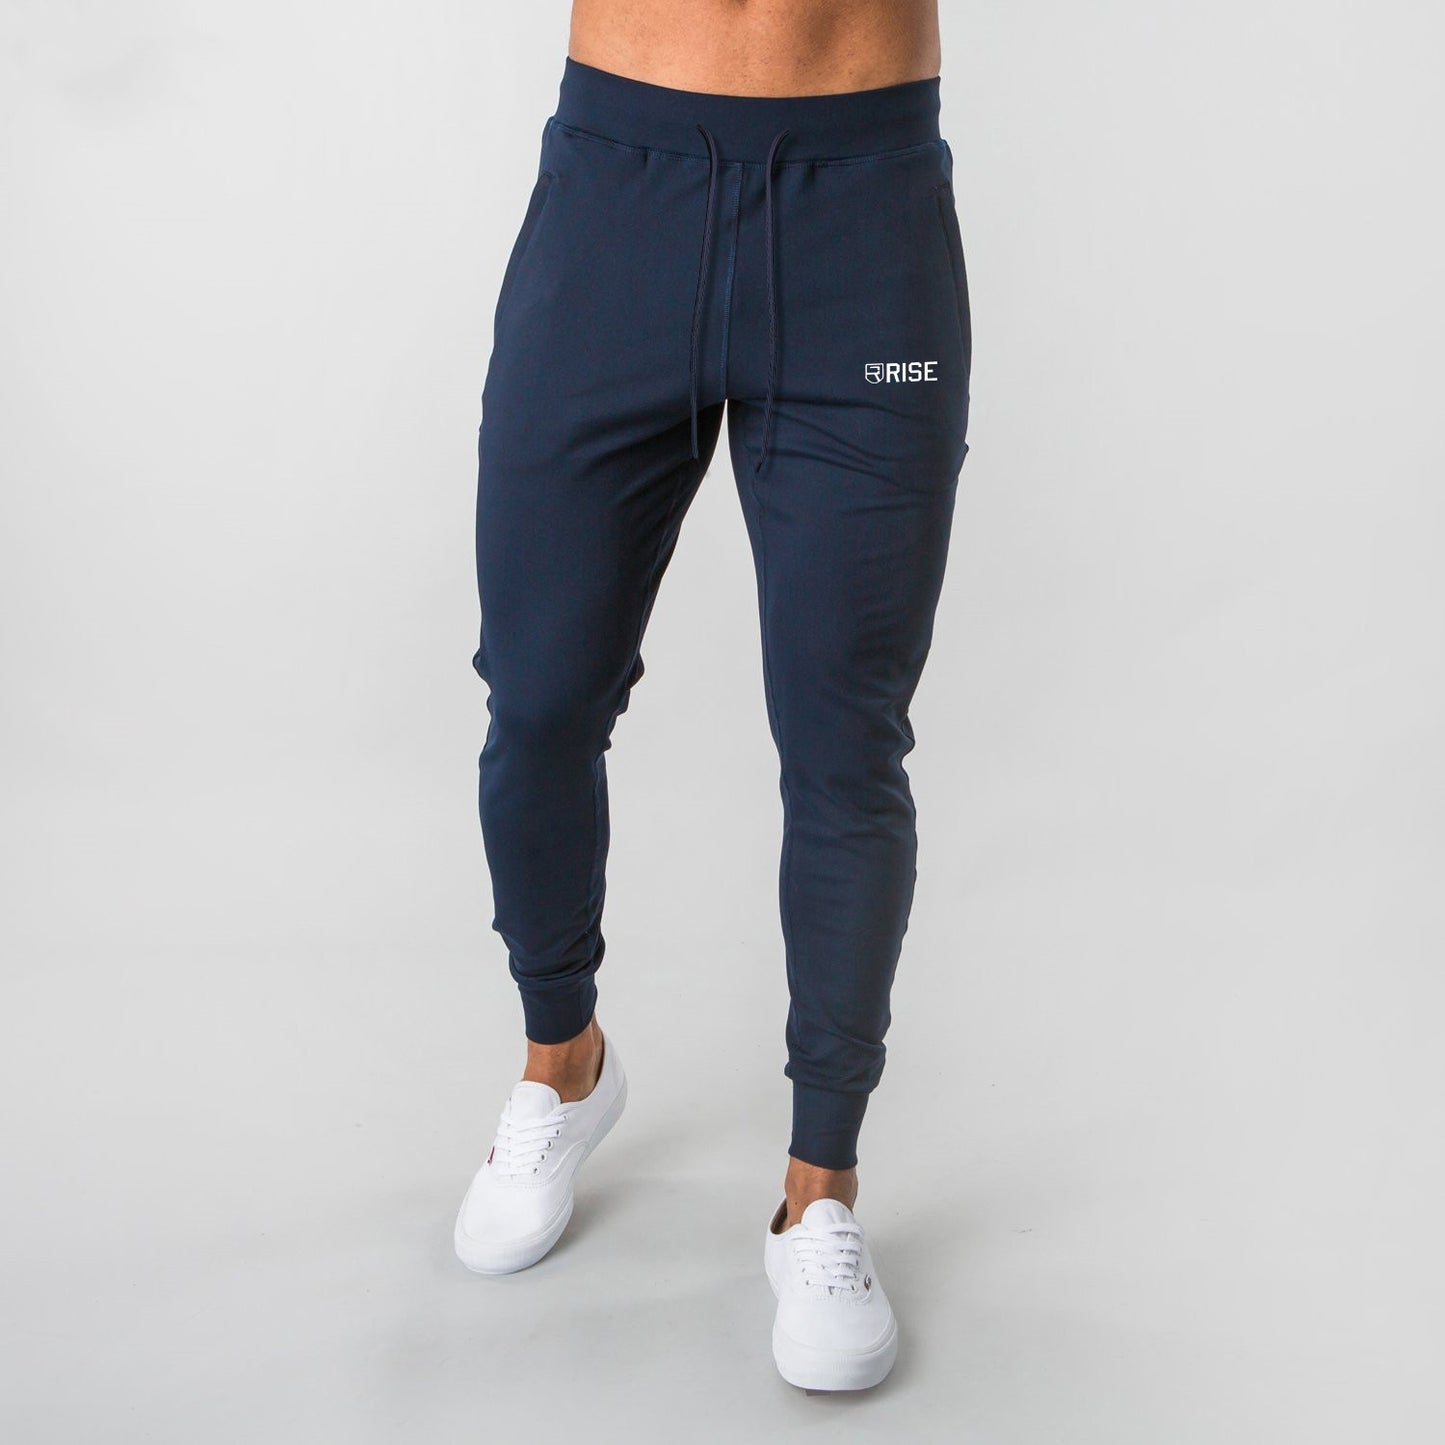 New muscle Europe and the United States brothers sports casual pants men's trend slim-fit fitness pants cotton wholesale